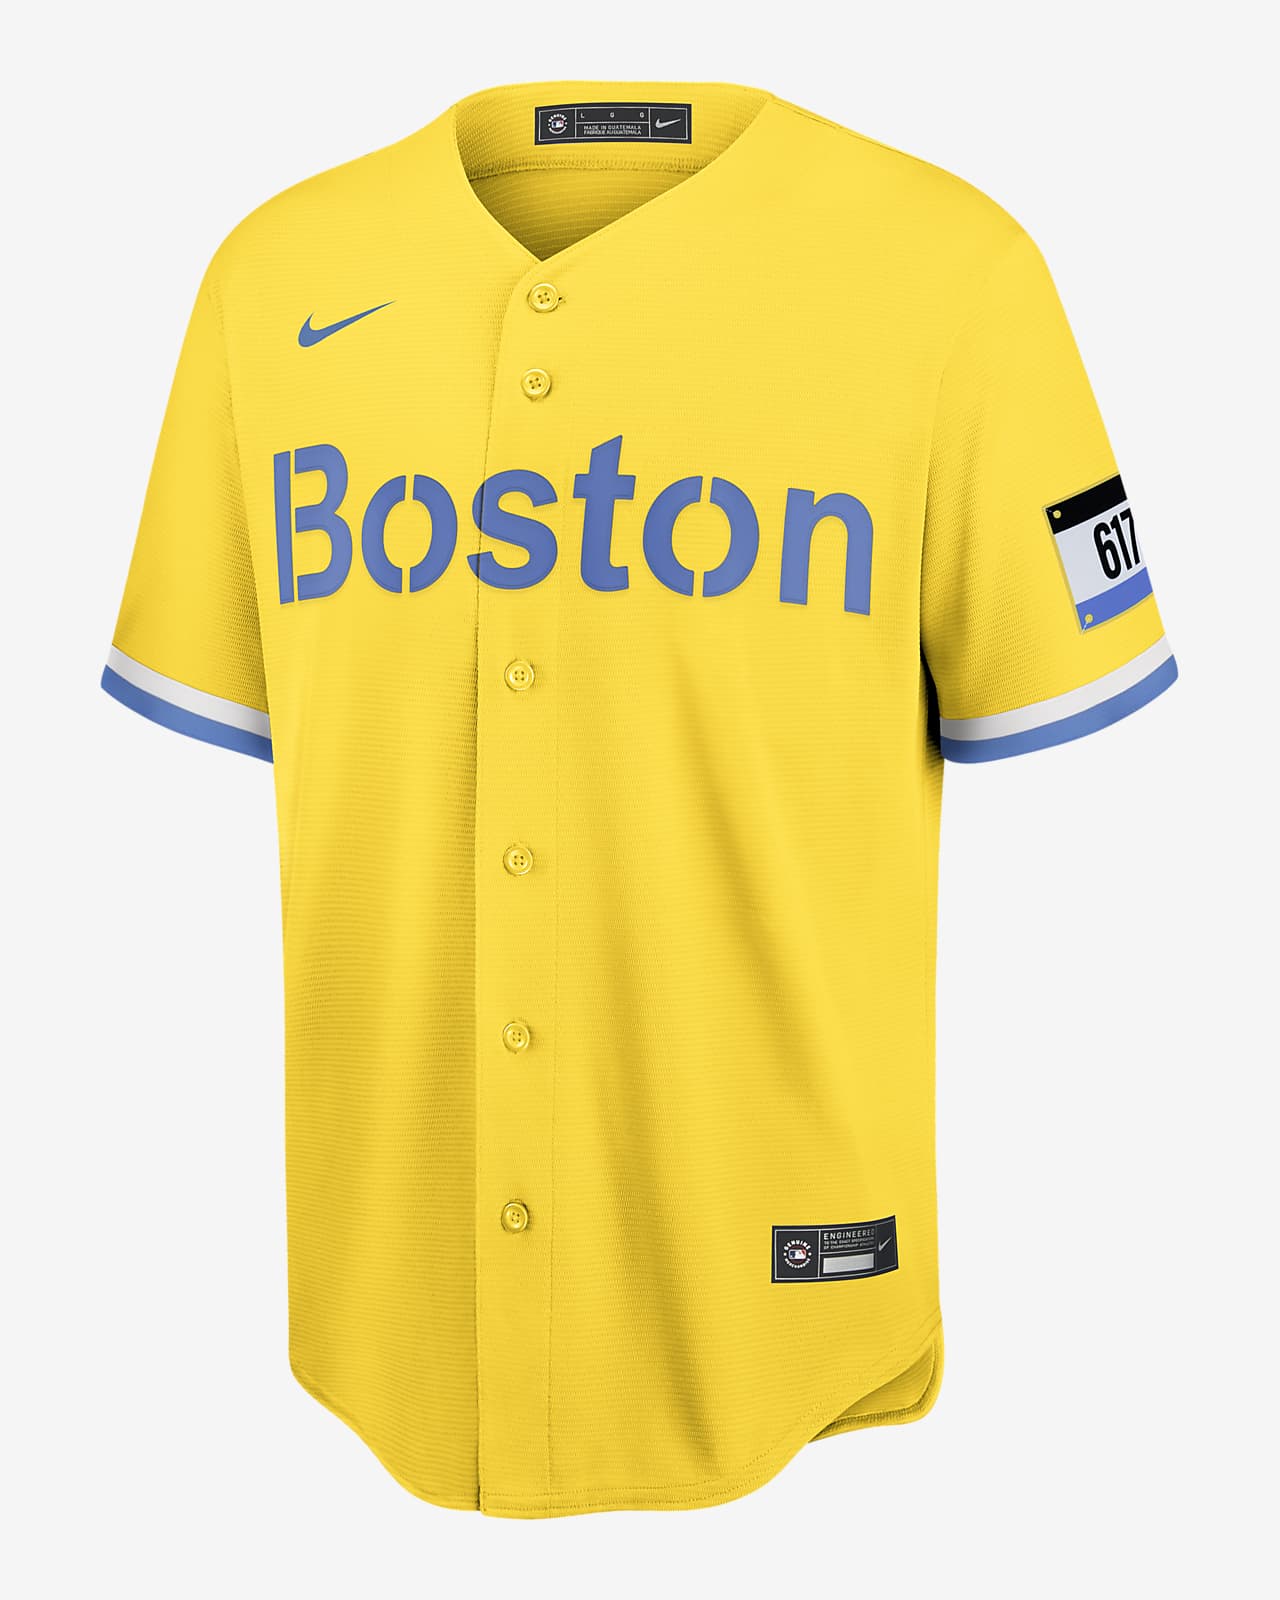 nike city connect jerseys release date